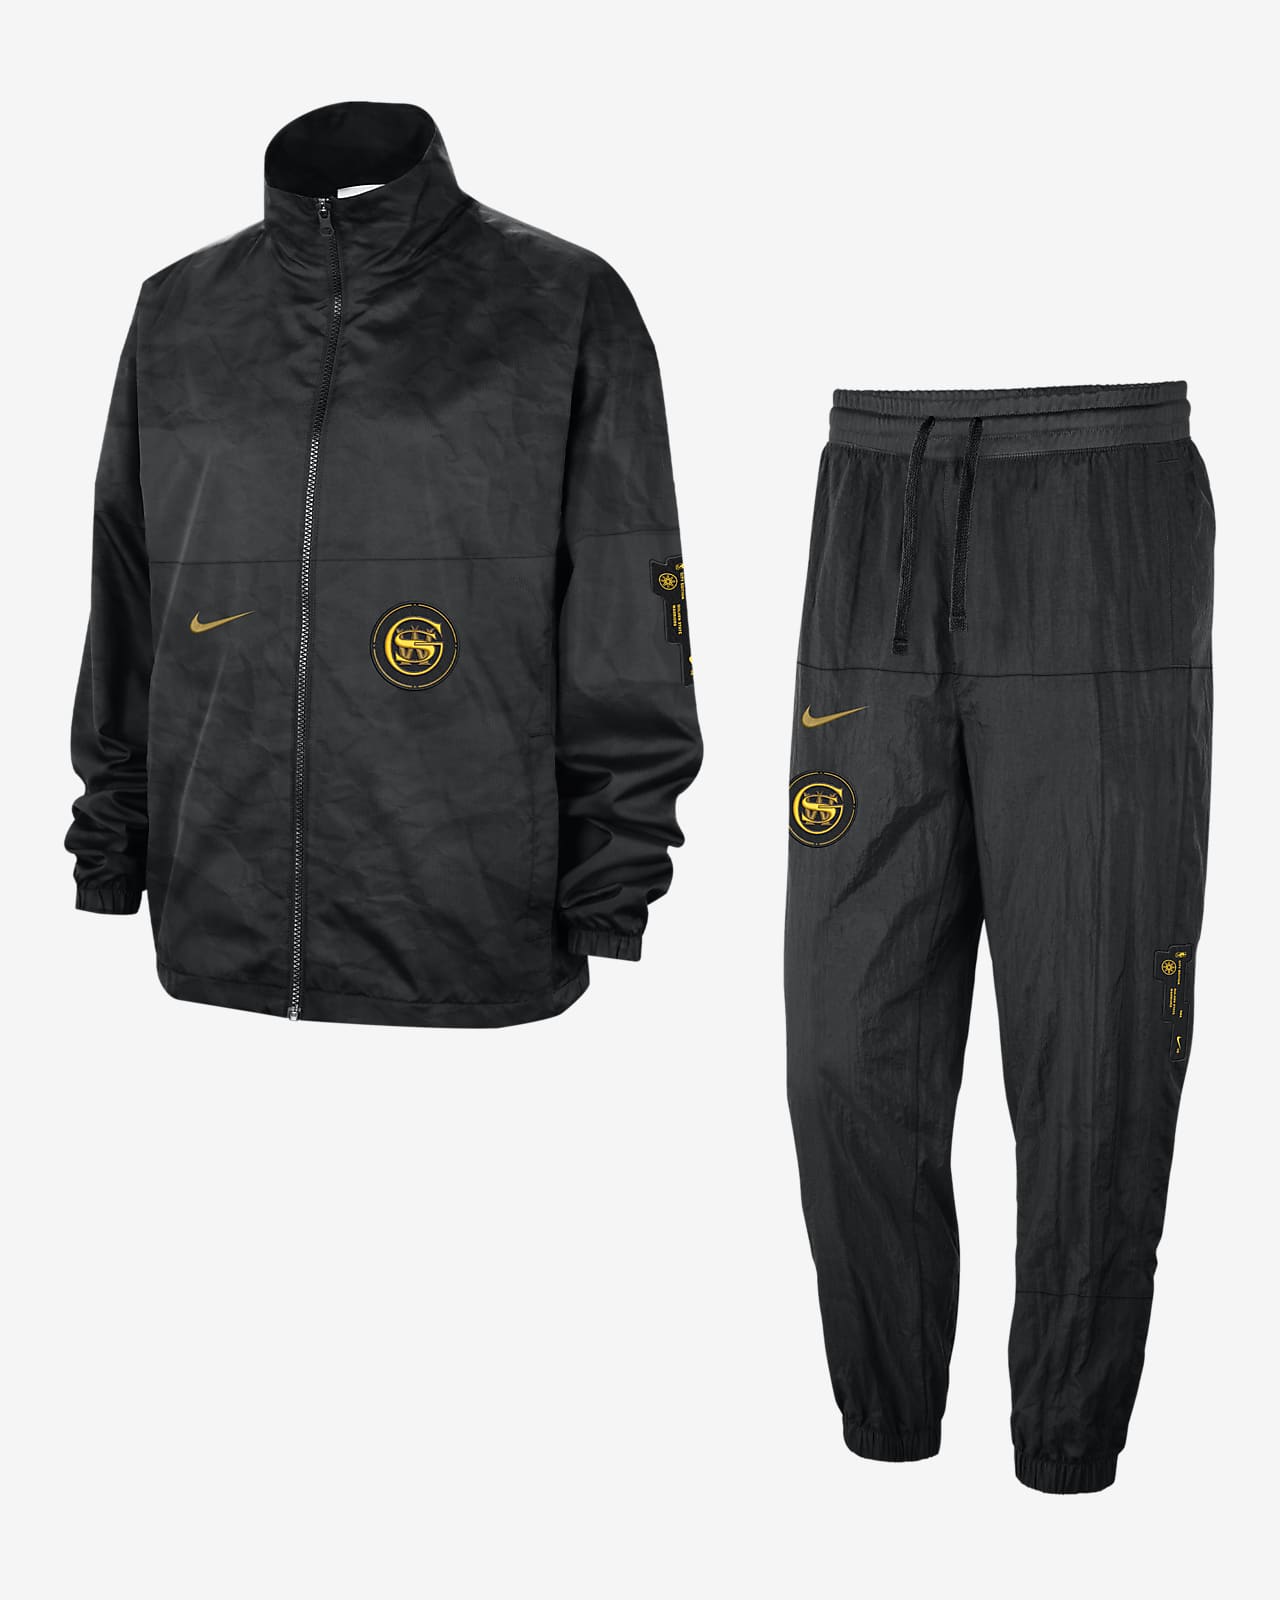 Golden State Warriors Starting 5 City Edition Men's Nike NBA Courtside Tracksuit